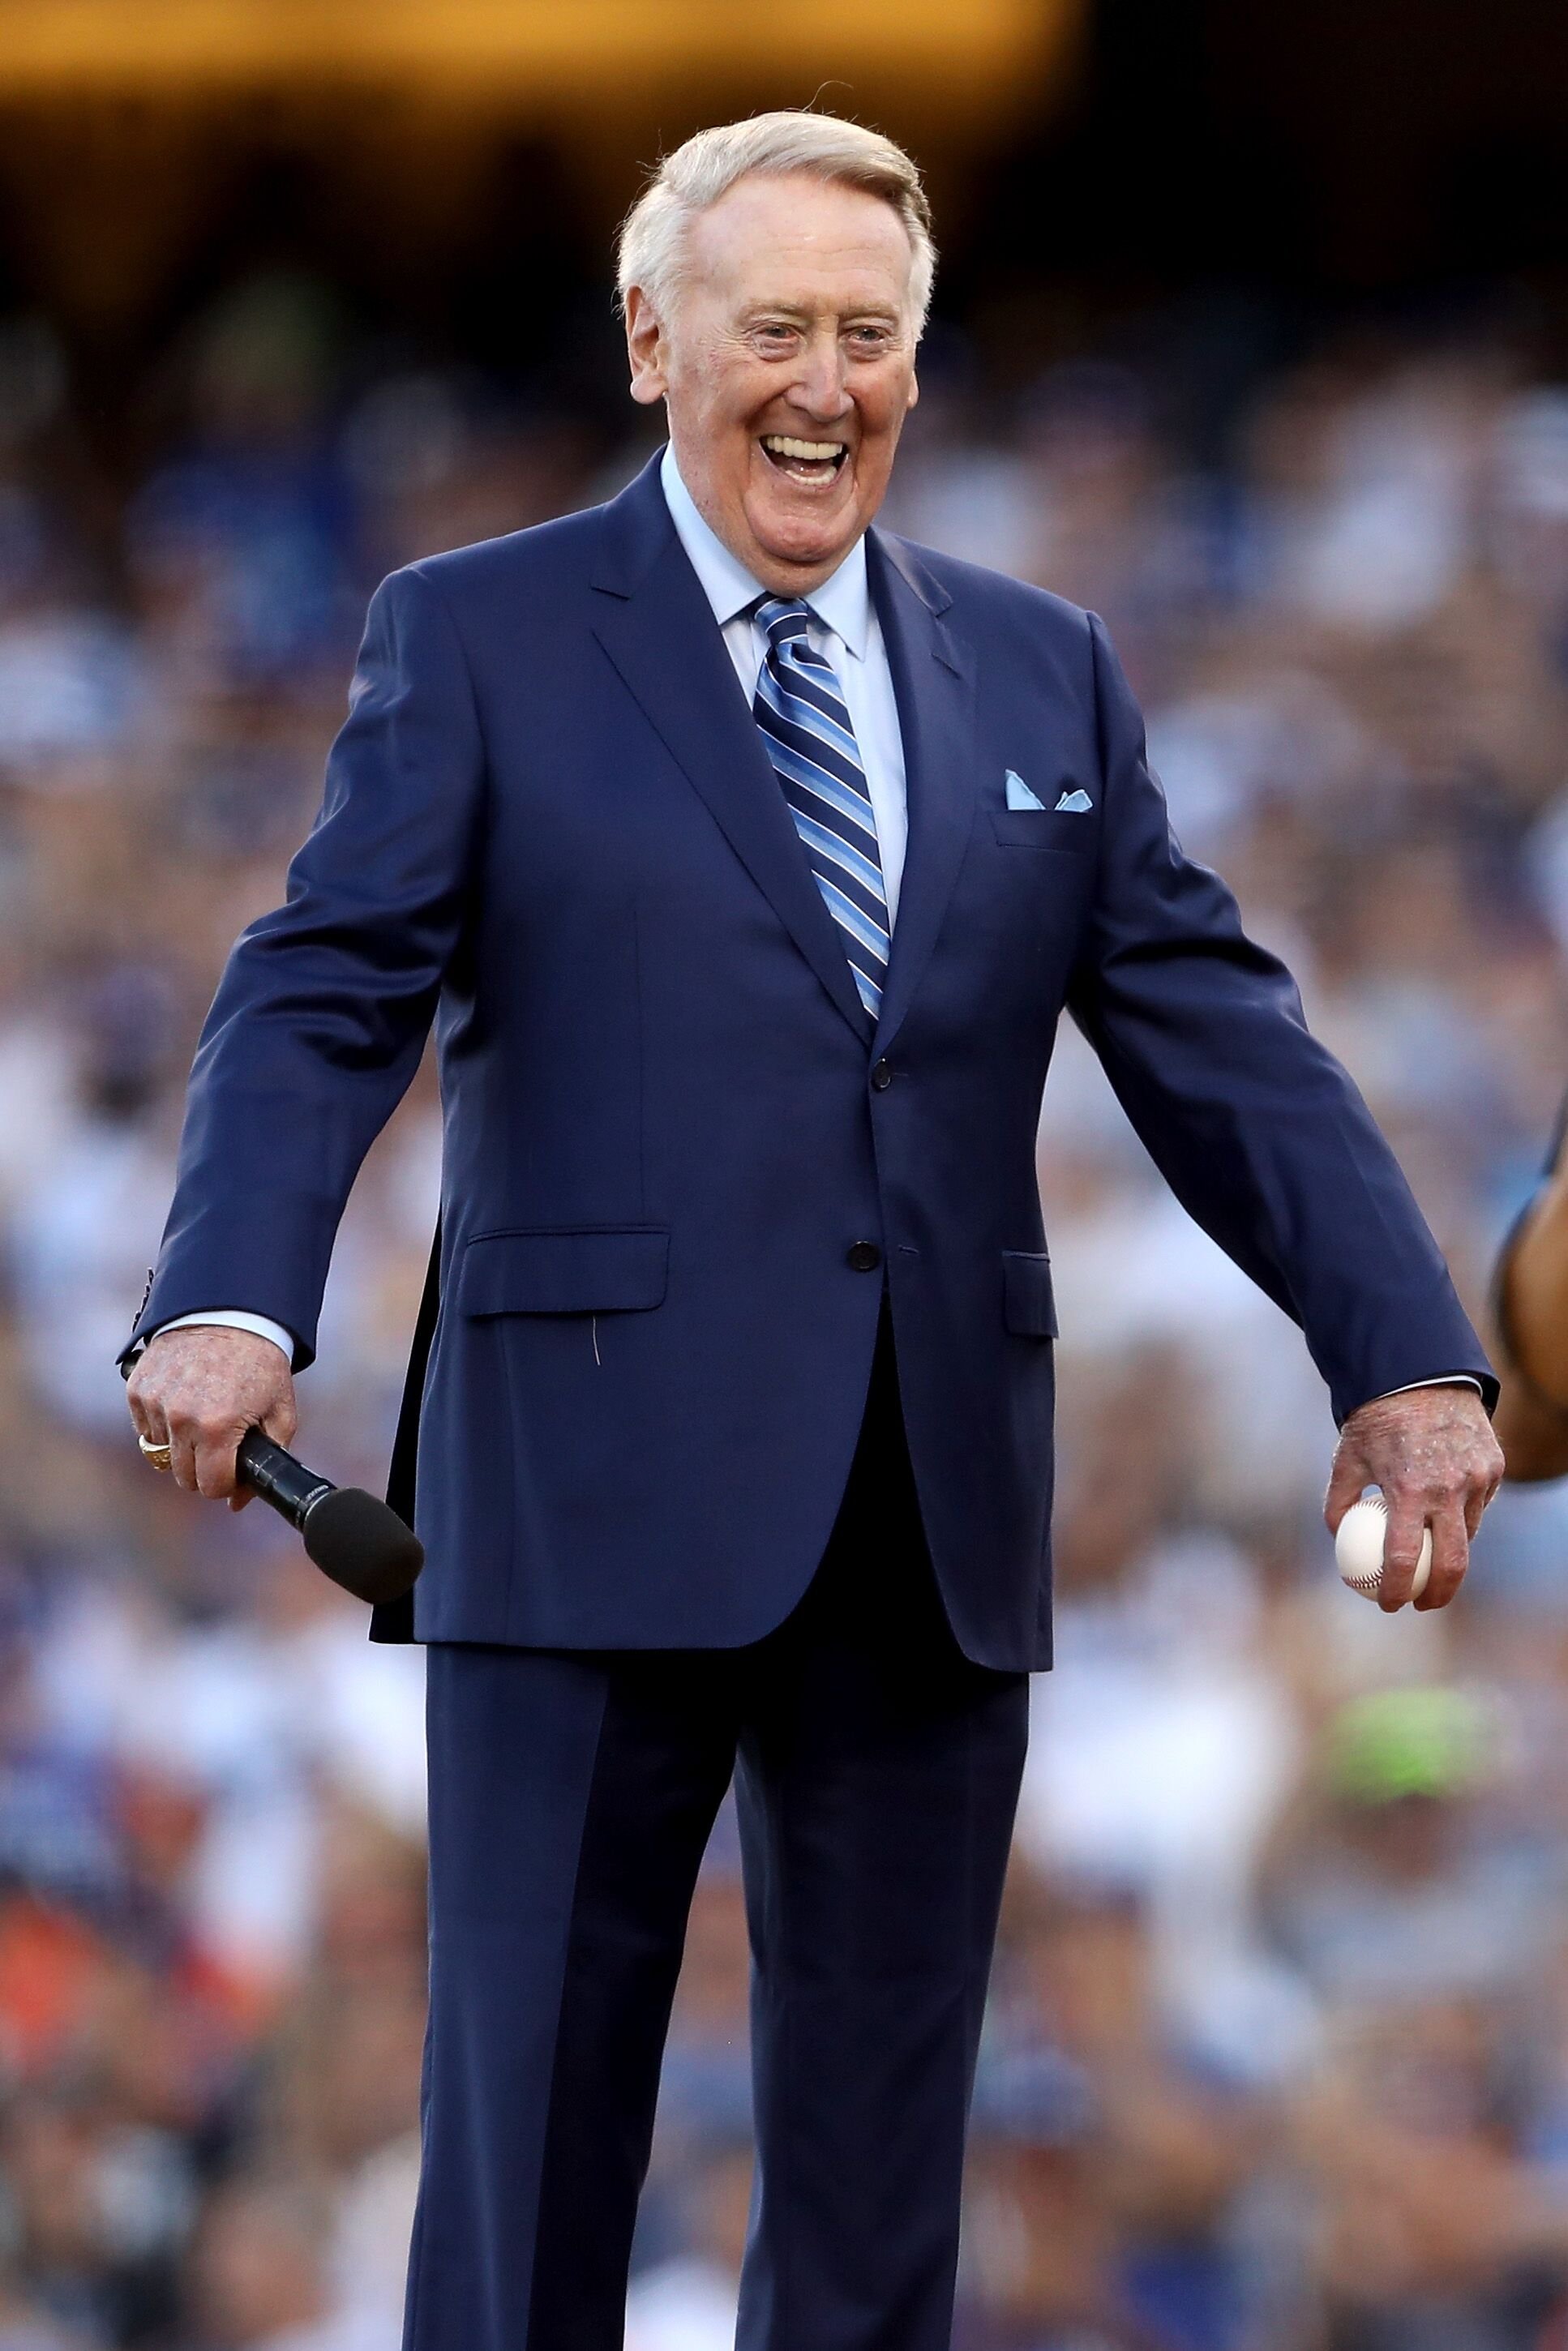 Vin Scully stands on the field before game two of the 2017 World Series between the Houston Astros and the Los Angeles Dodgers at Dodger Stadium on October 25, 2017 in Los Angeles, California | Photo: Getty Images 